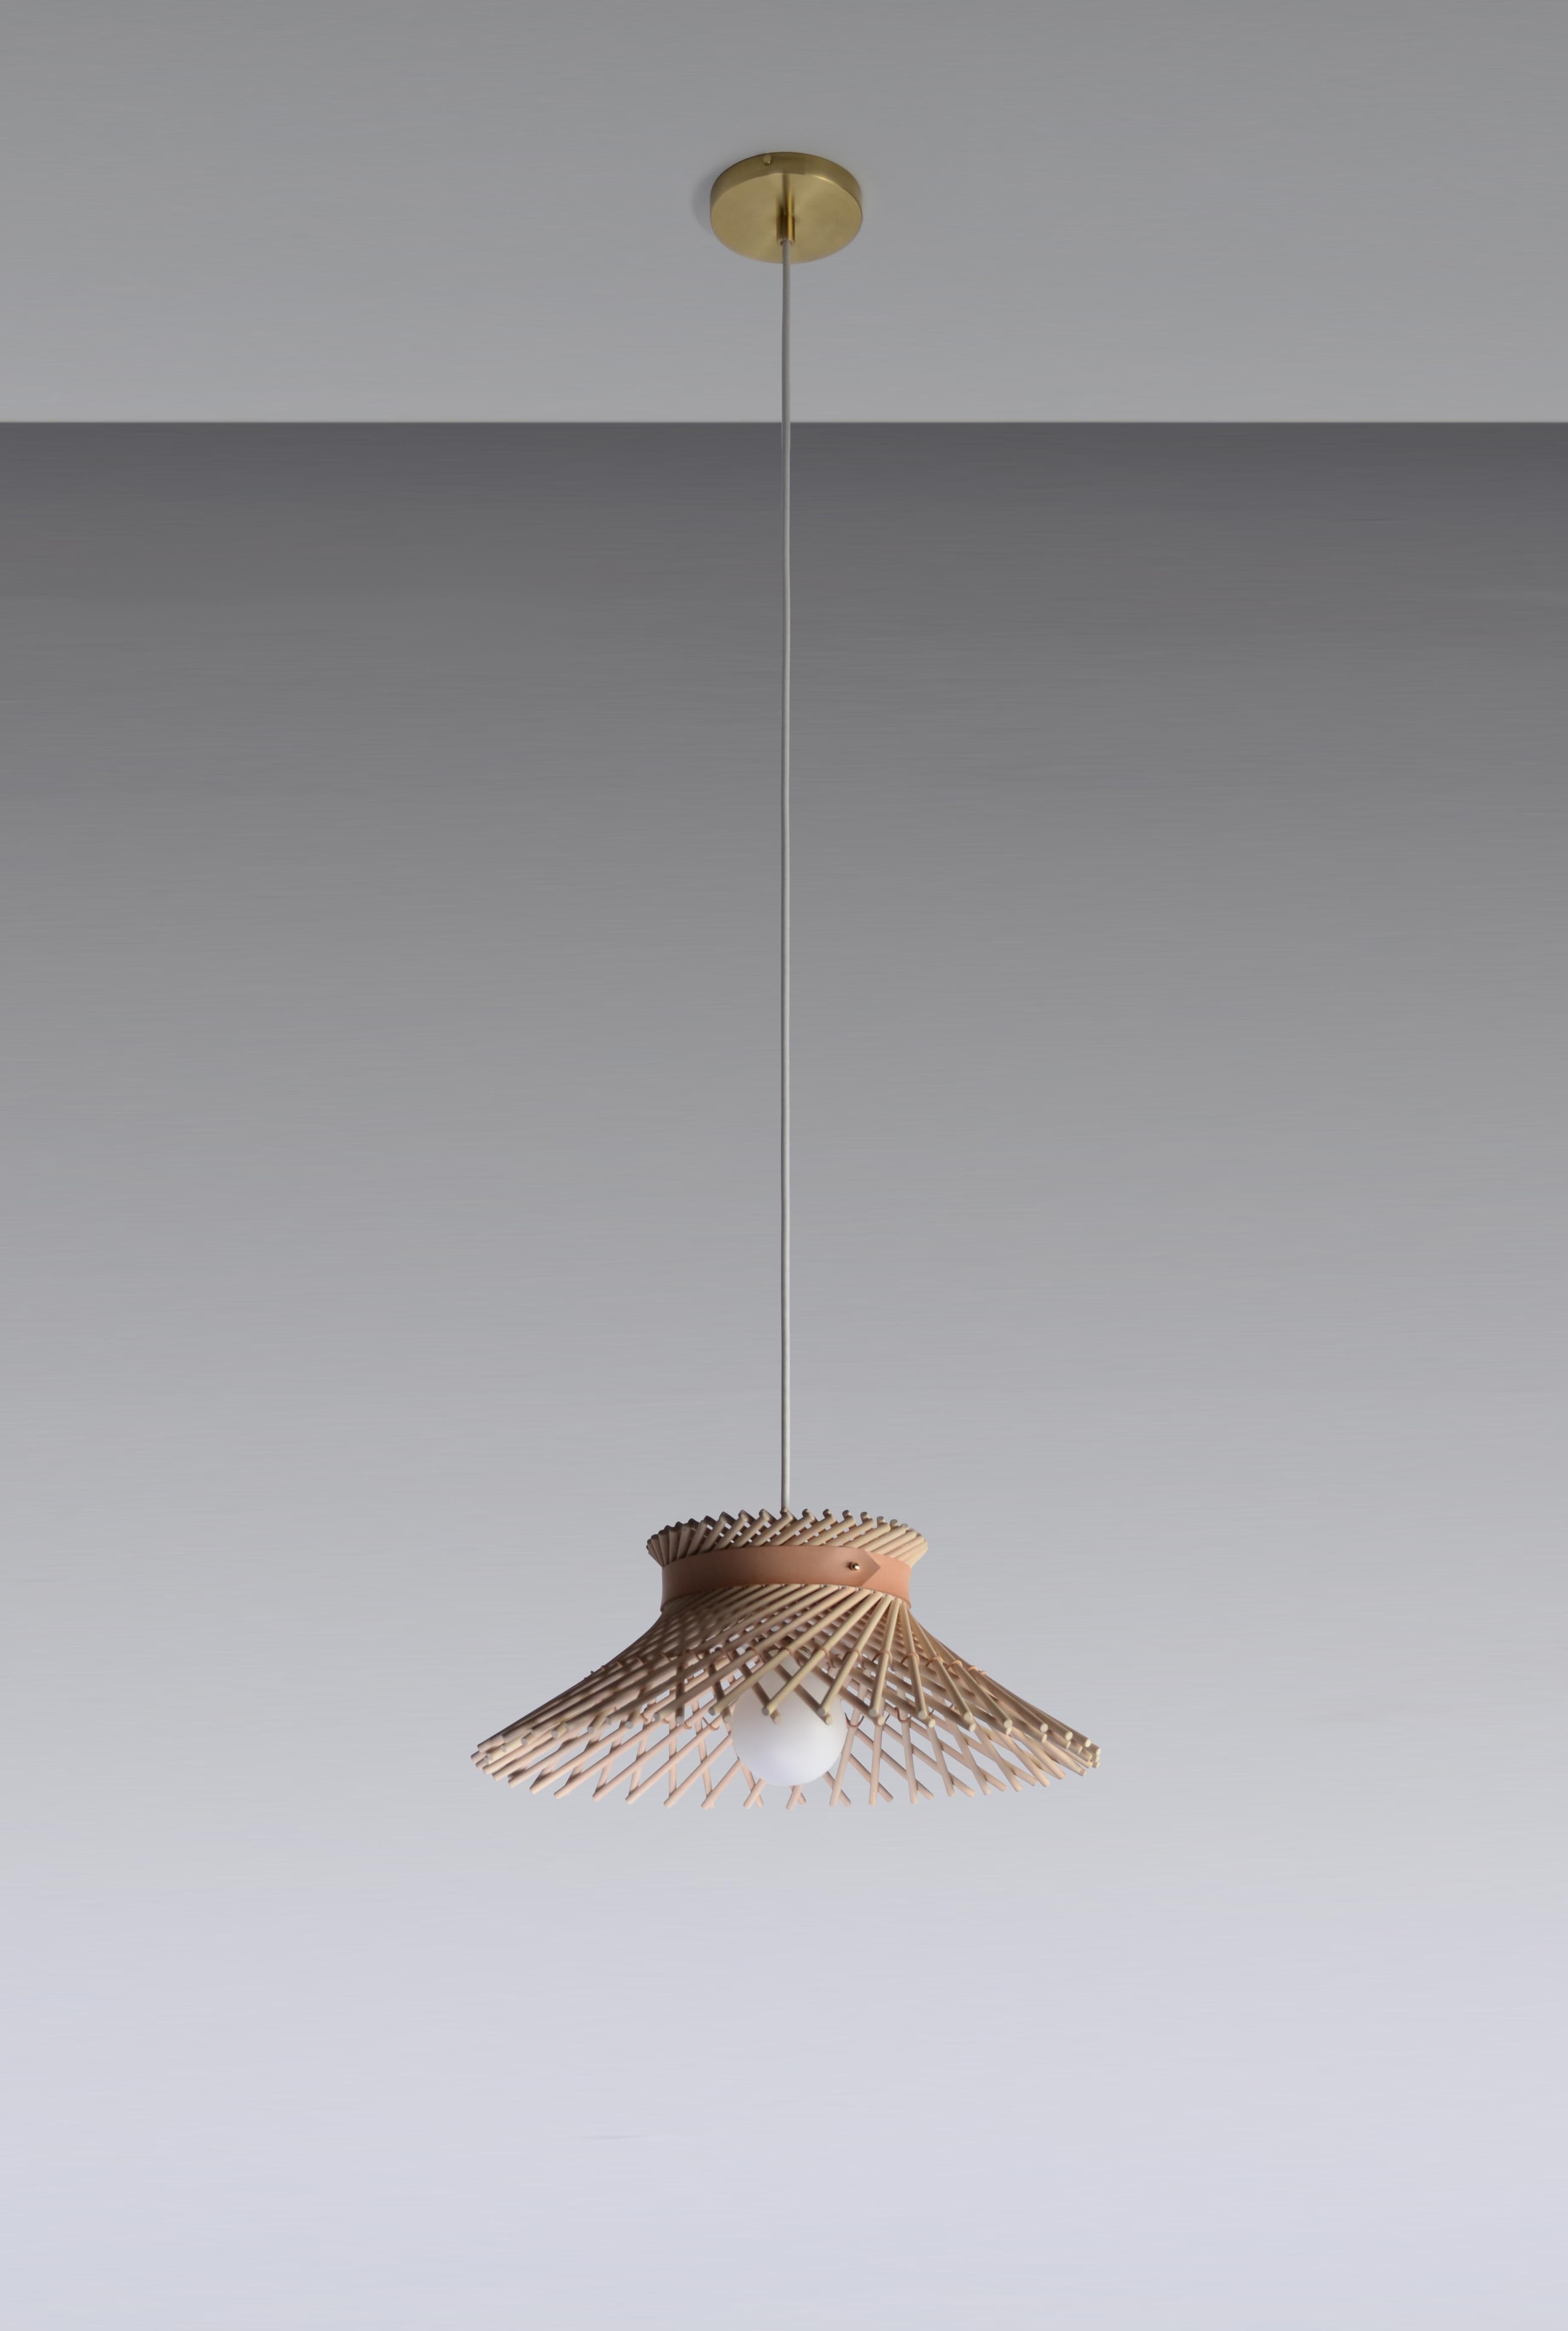 Mooda natural maple pendant 6 by Indo Made.
Dimensions: Ø 41.9 x H 17.8 cm (Suspension height is made to specification)
Materials: Natural Maple, Mugla White stone

All our lamps can be wired according to each country. If sold to the USA it will